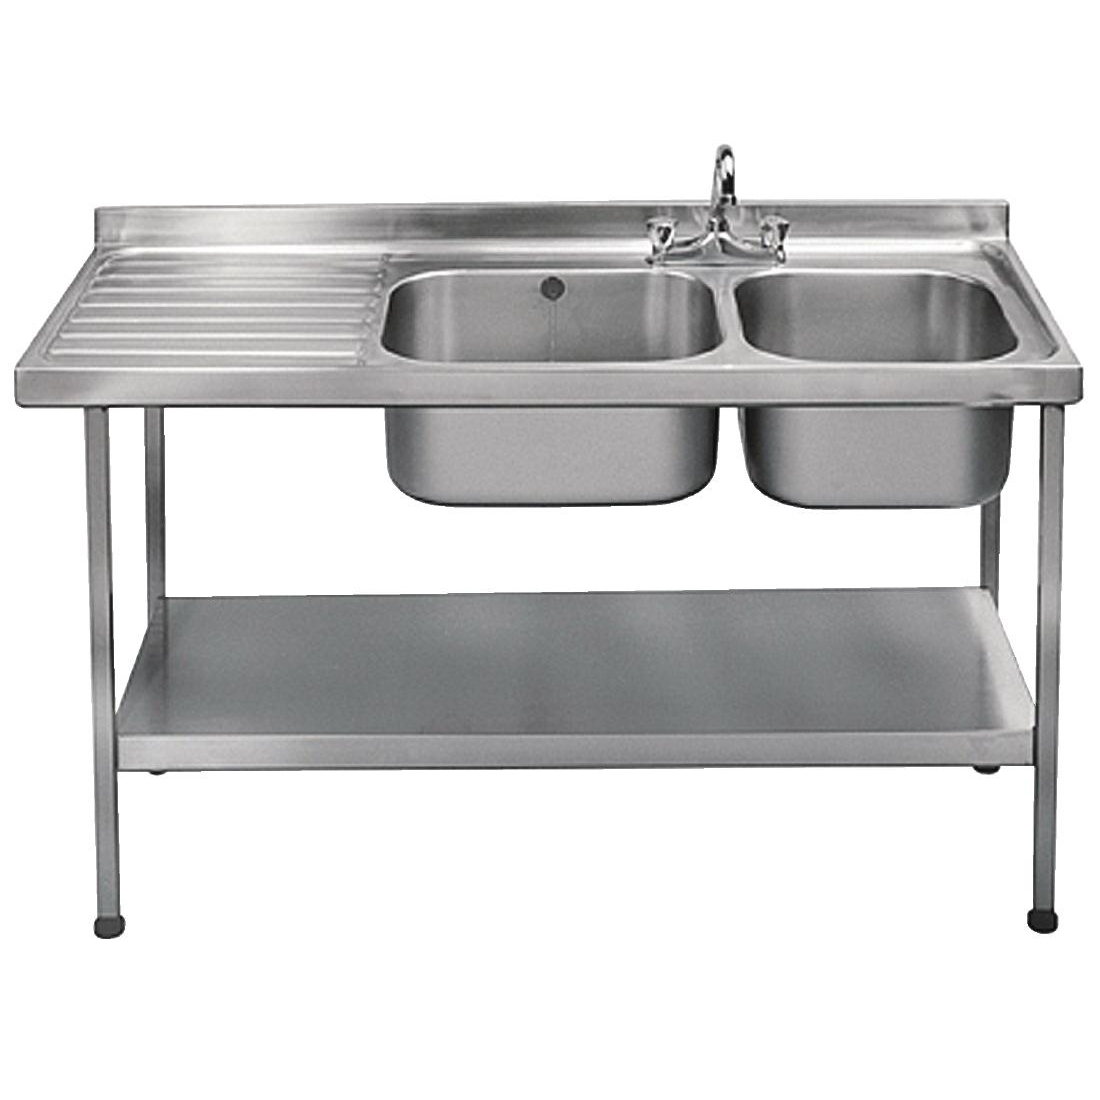 Franke Sissons Stainless Steel Sink Double Left Hand Drainer 1500x600mm